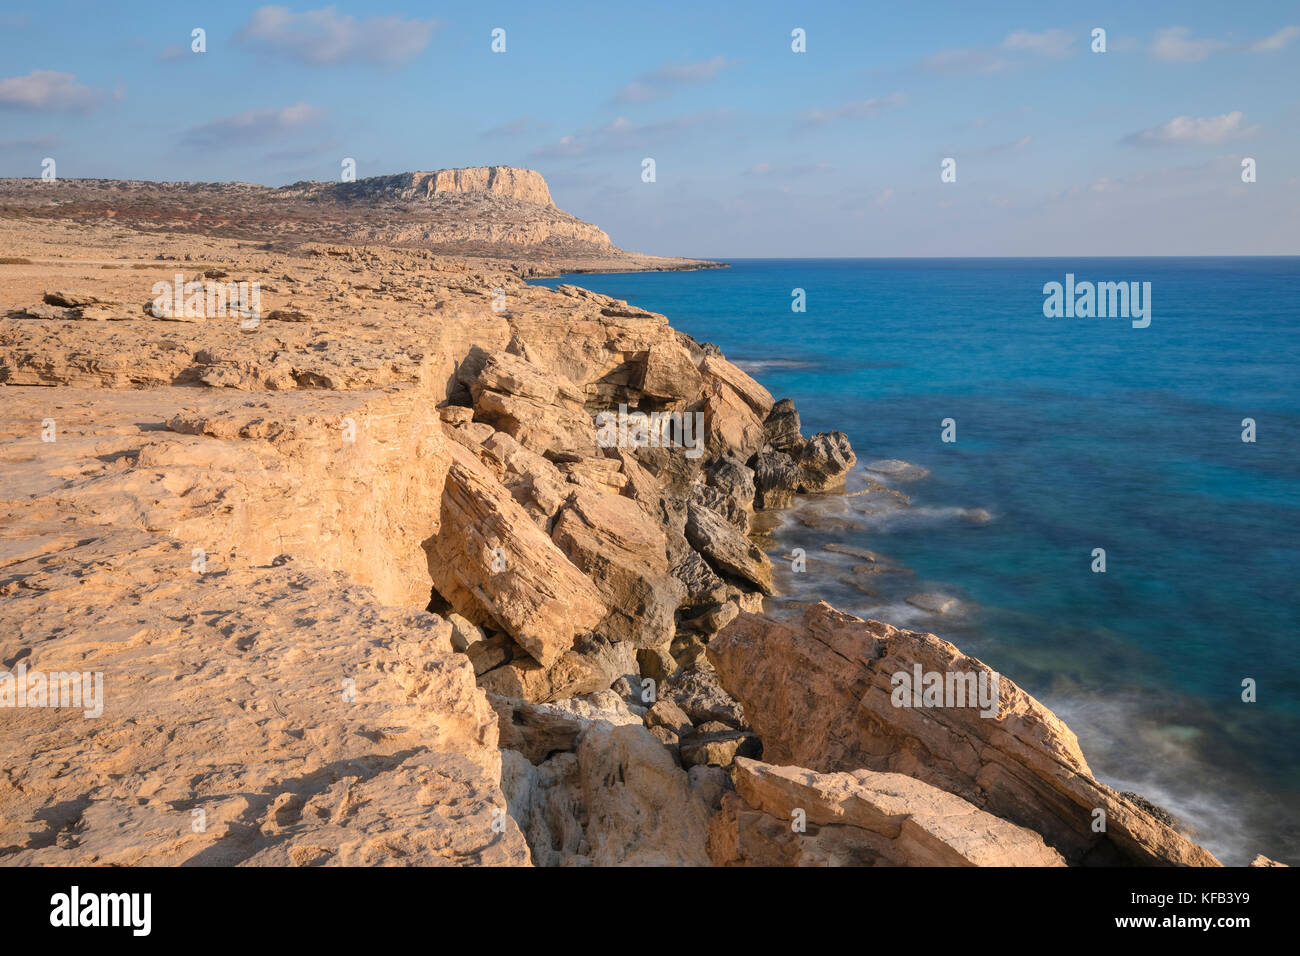 Grottes marines, Ayia Napa, Chypre Banque D'Images